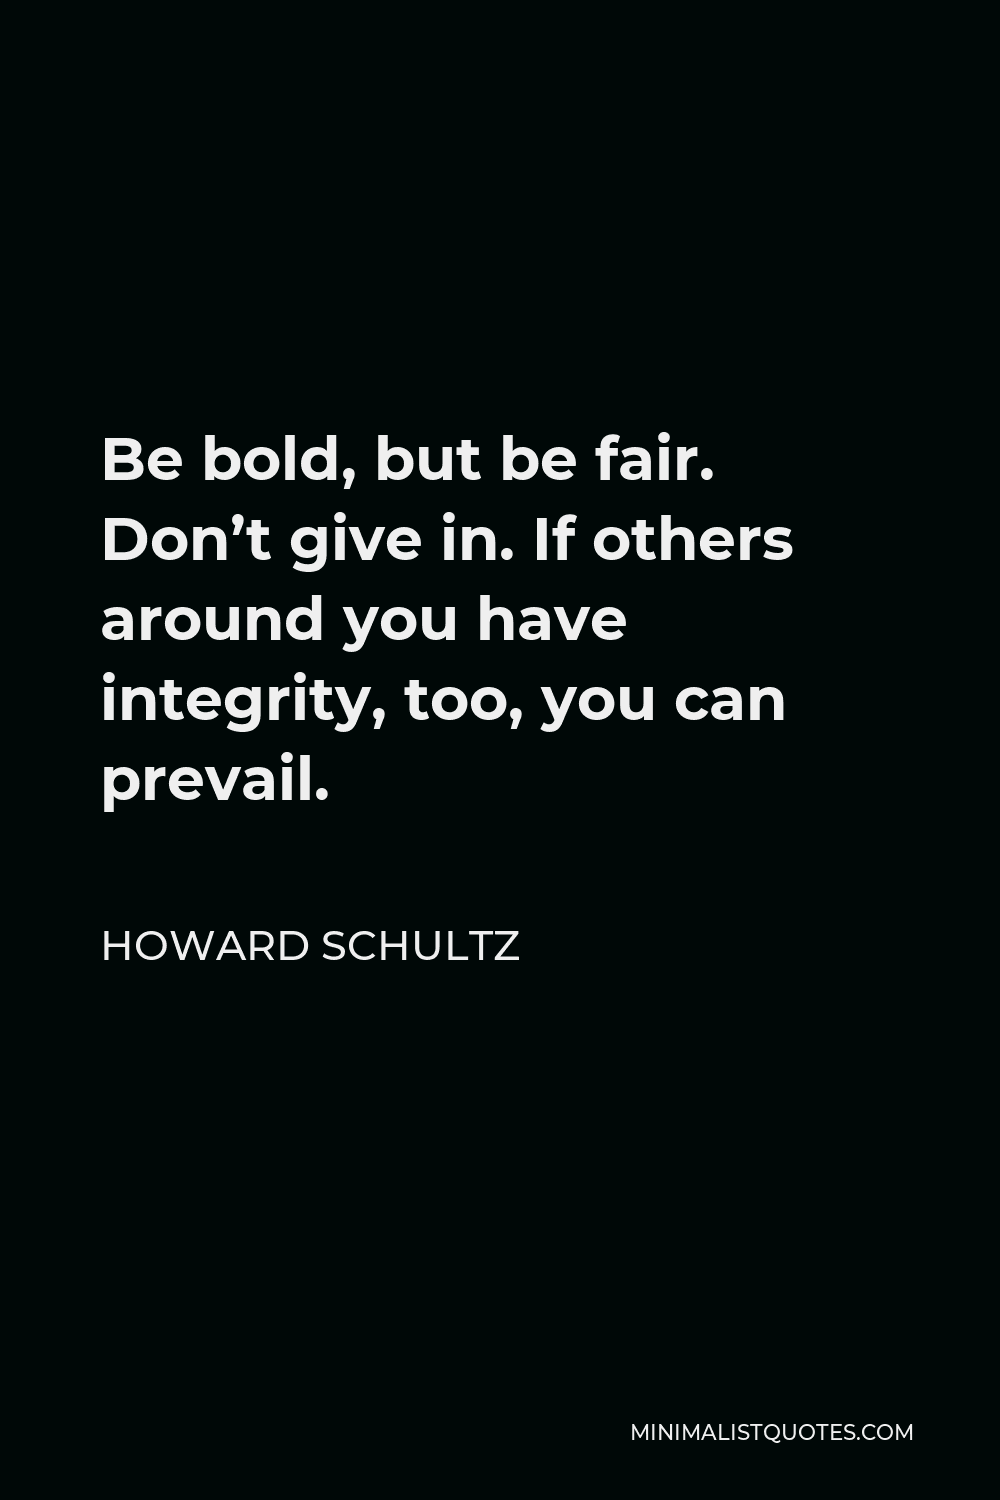 Howard Schultz Quote - Be bold, but be fair. Don’t give in. If others around you have integrity, too, you can prevail.